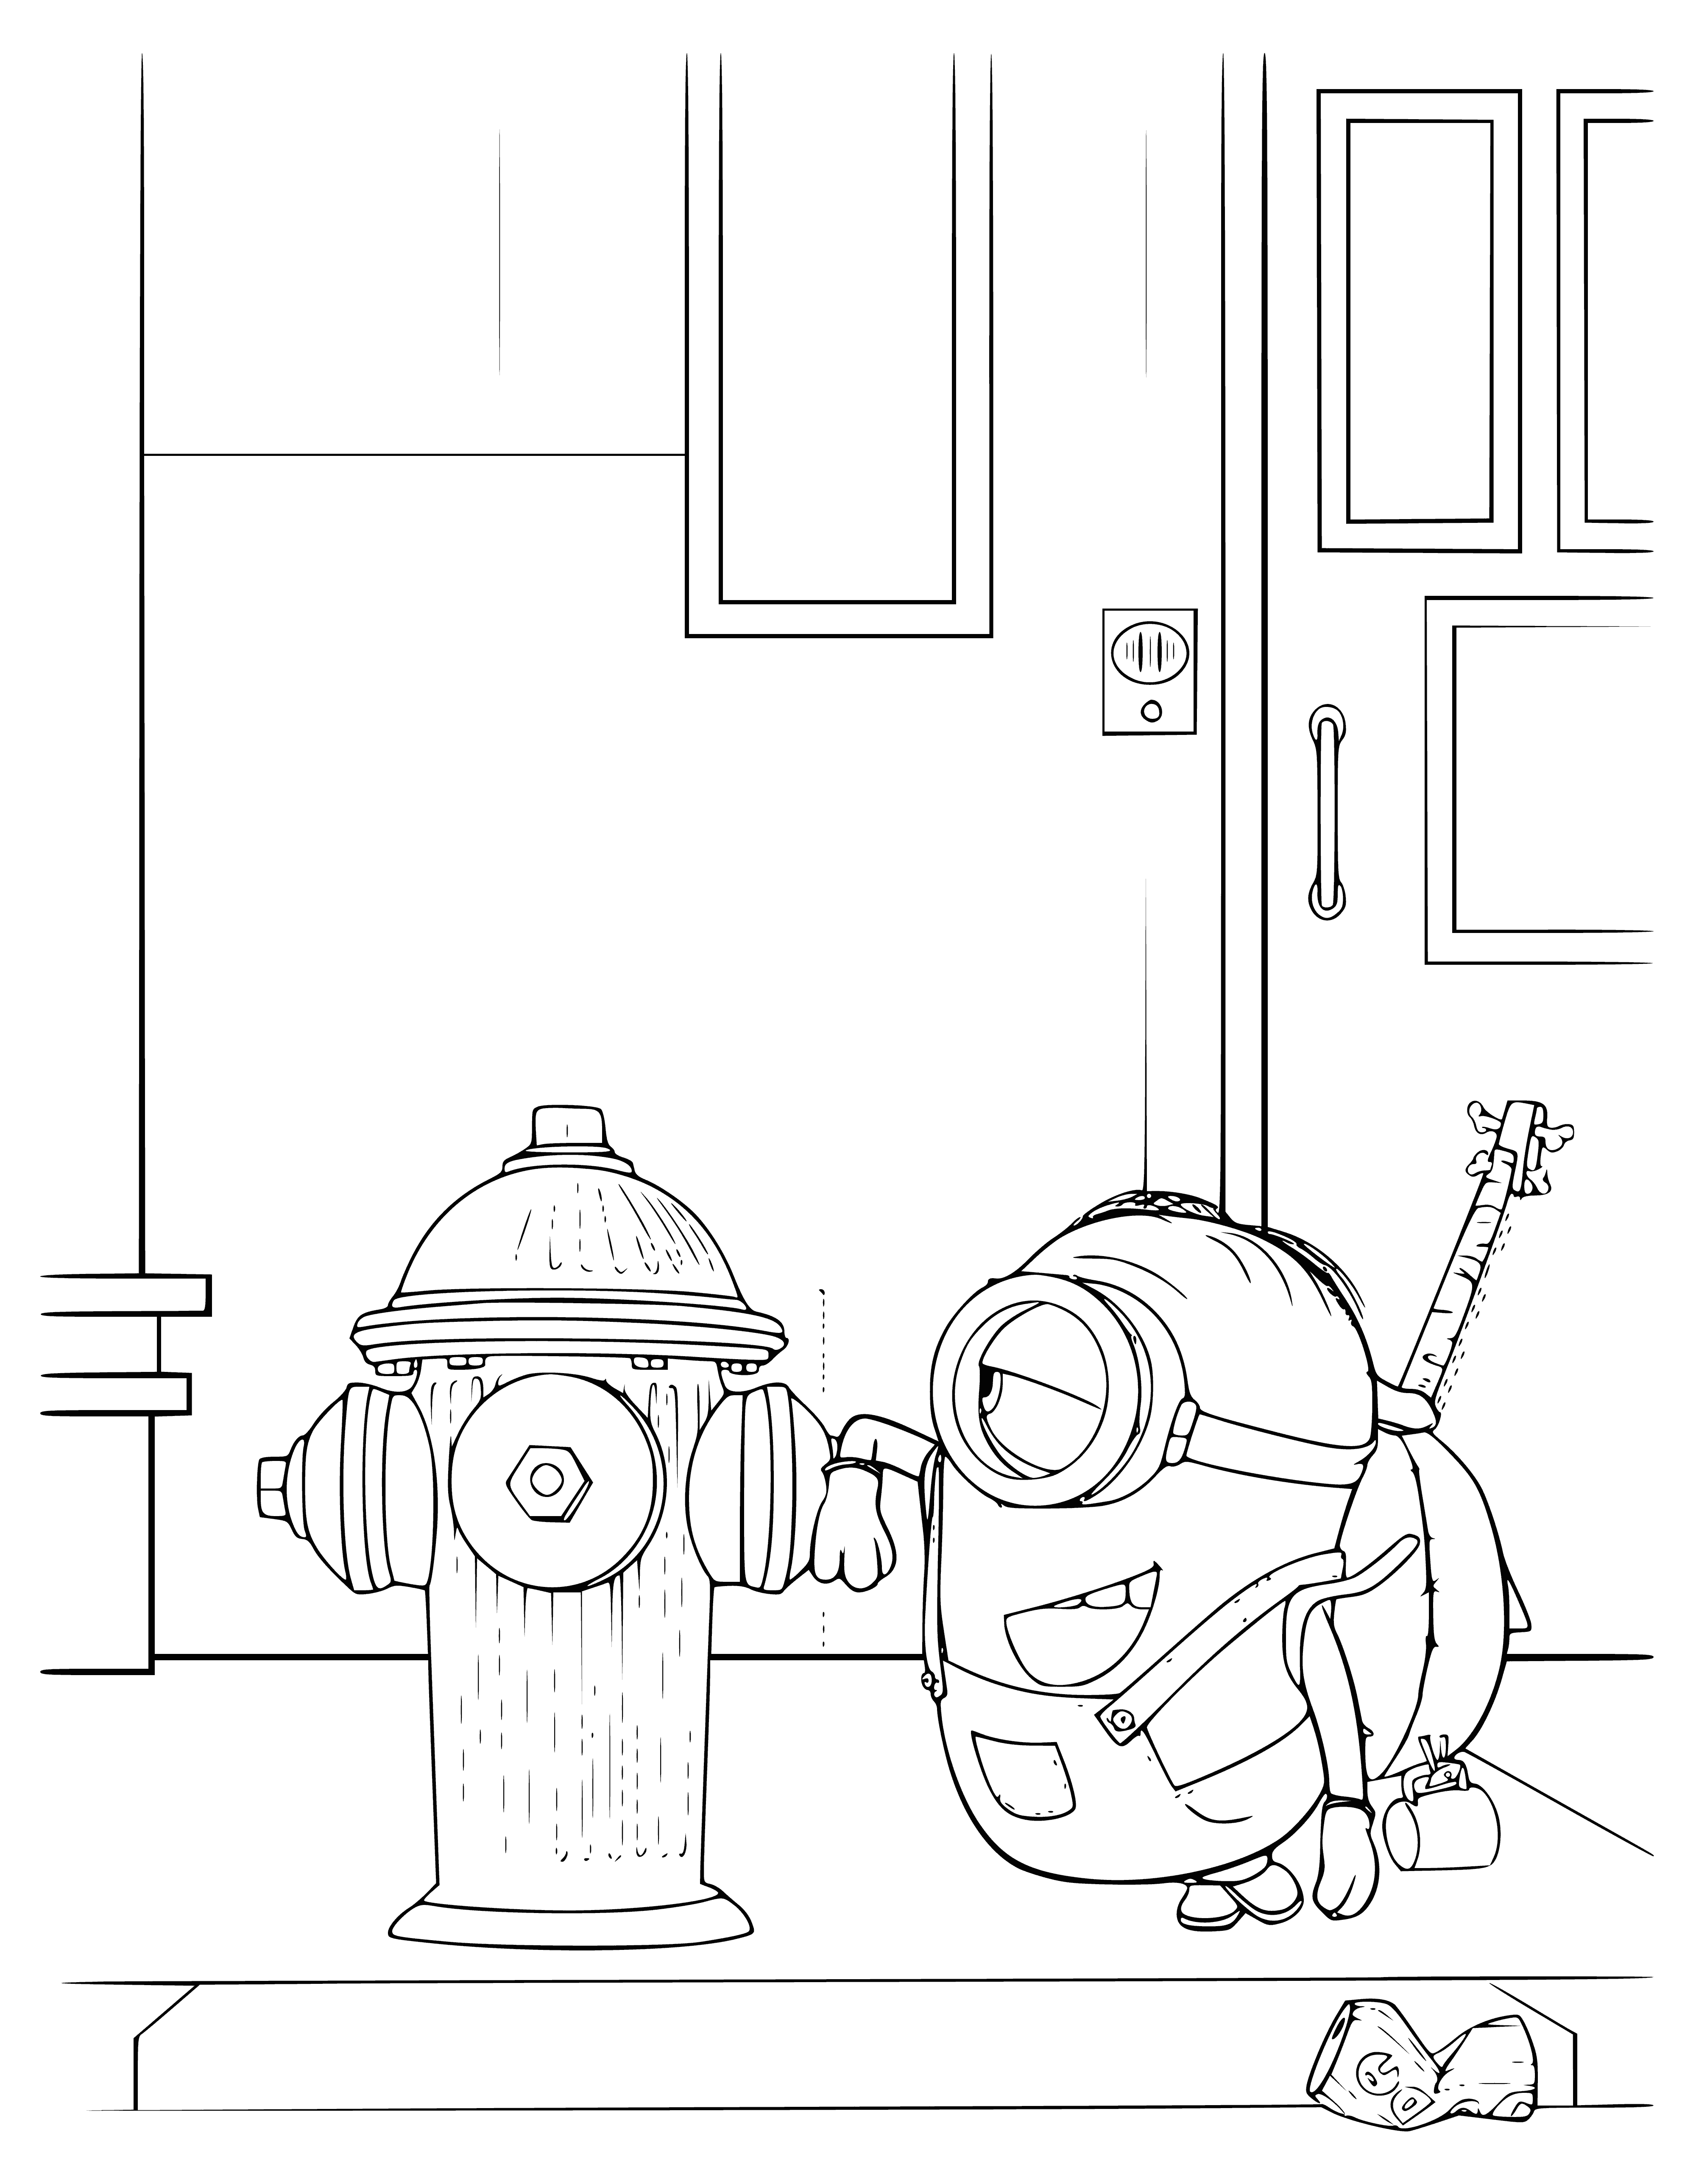 coloring page: Minions are bumbling but loyal servants of Gru, seen in blue overalls and goggles. Lovable, but always causing trouble!